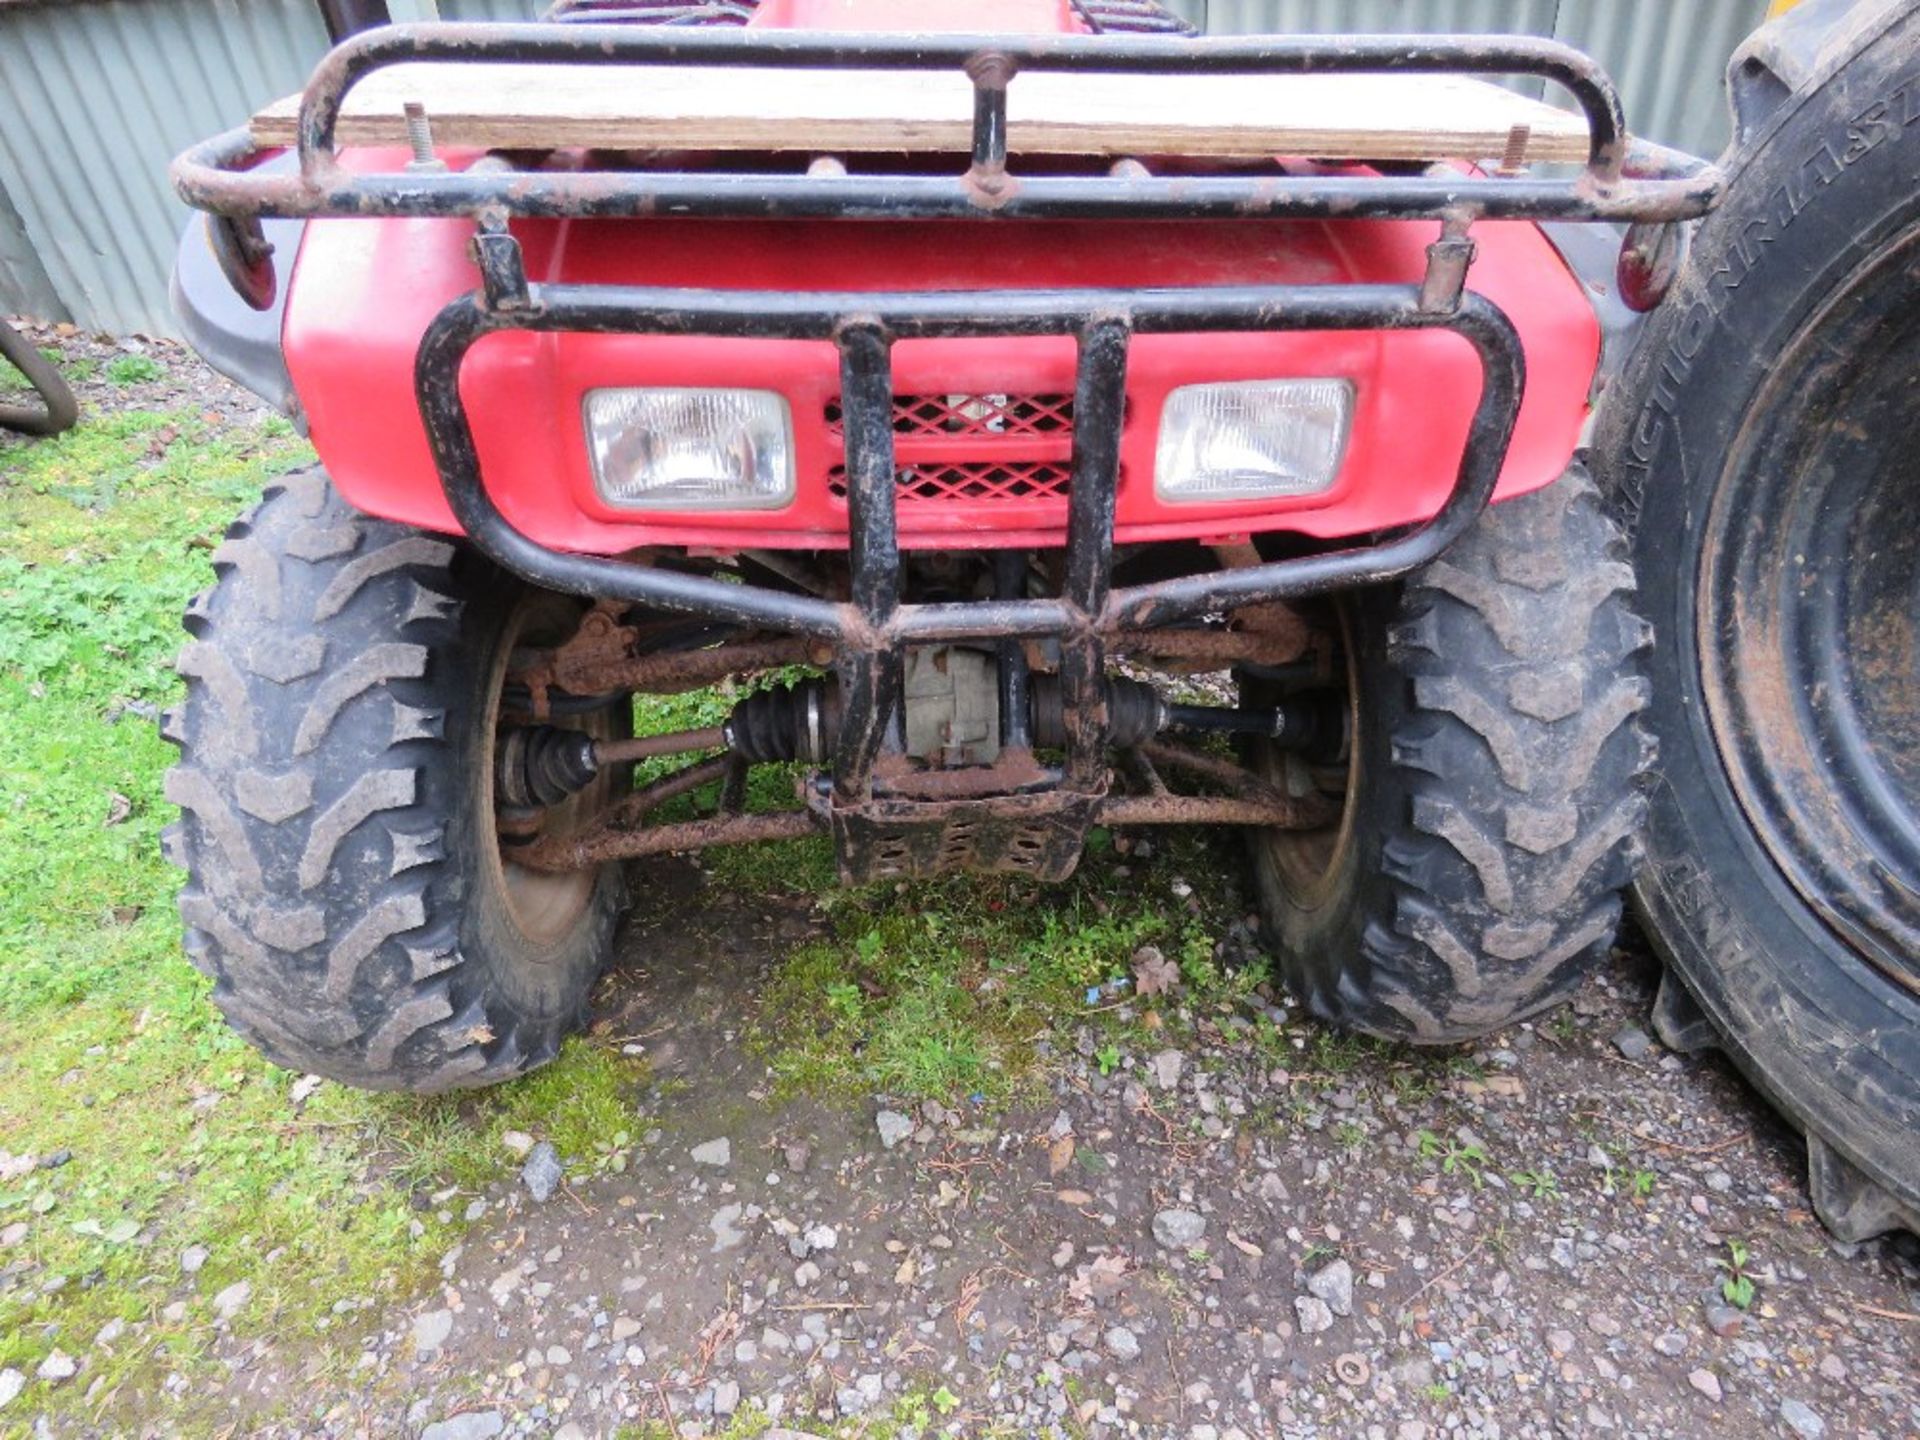 HONDA BIG RED 4WD PETROL ENGINED QUAD BIKE. WHEN TESTED WAS SEEN TO DRIVE, STEER AND BRAKE SOURCED F - Image 3 of 9